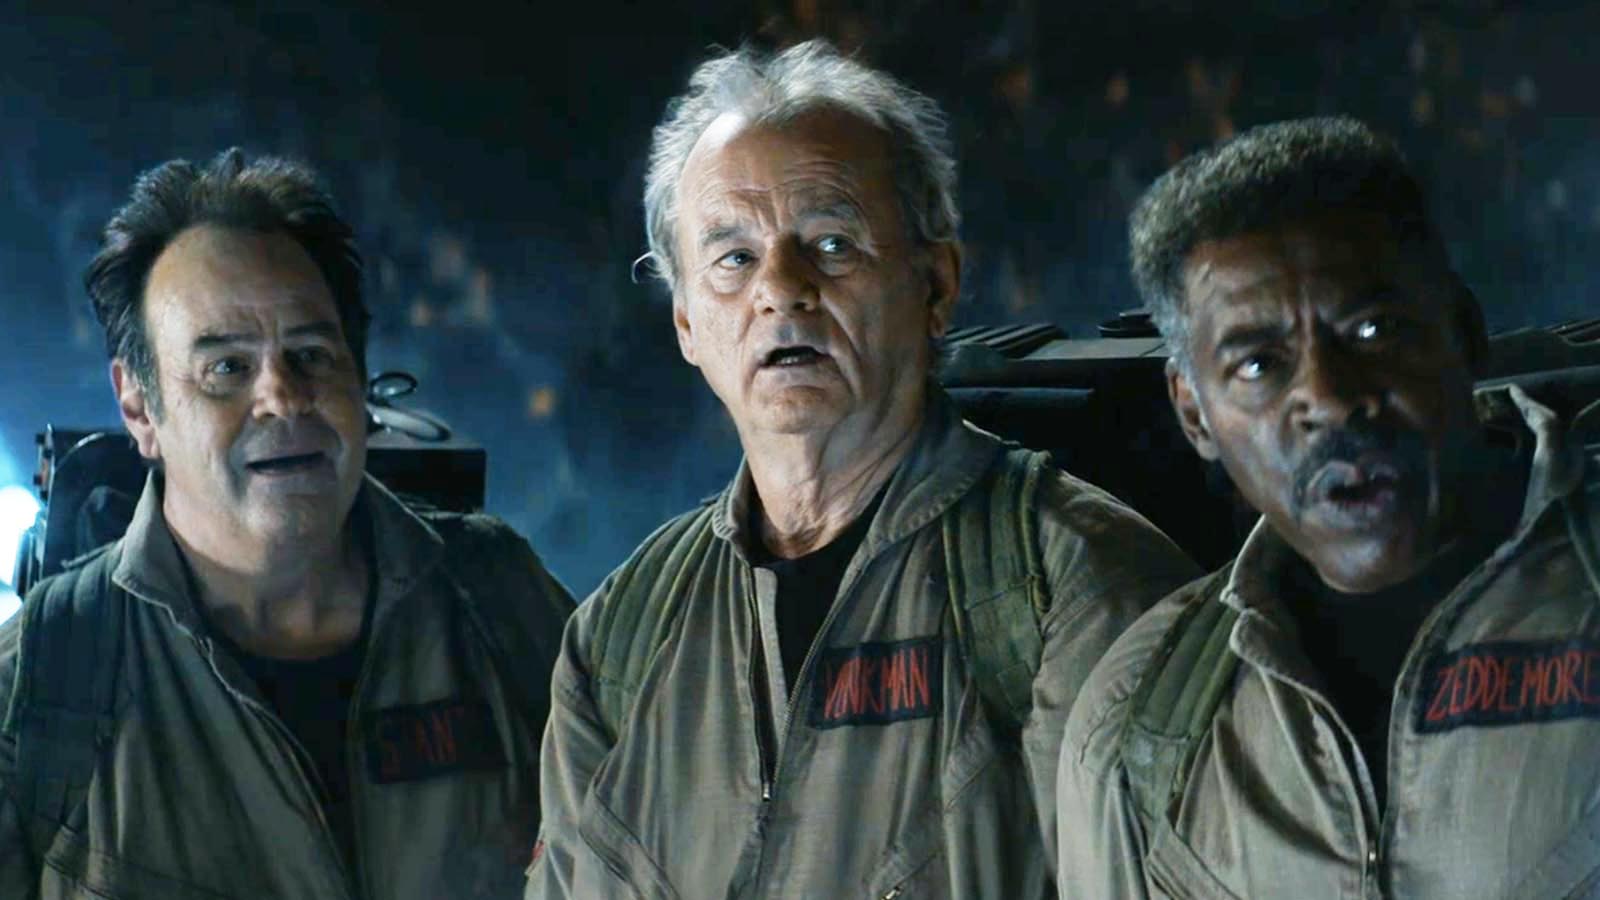 Sony officially announces Ghostbusters Afterlife sequel and Netflix